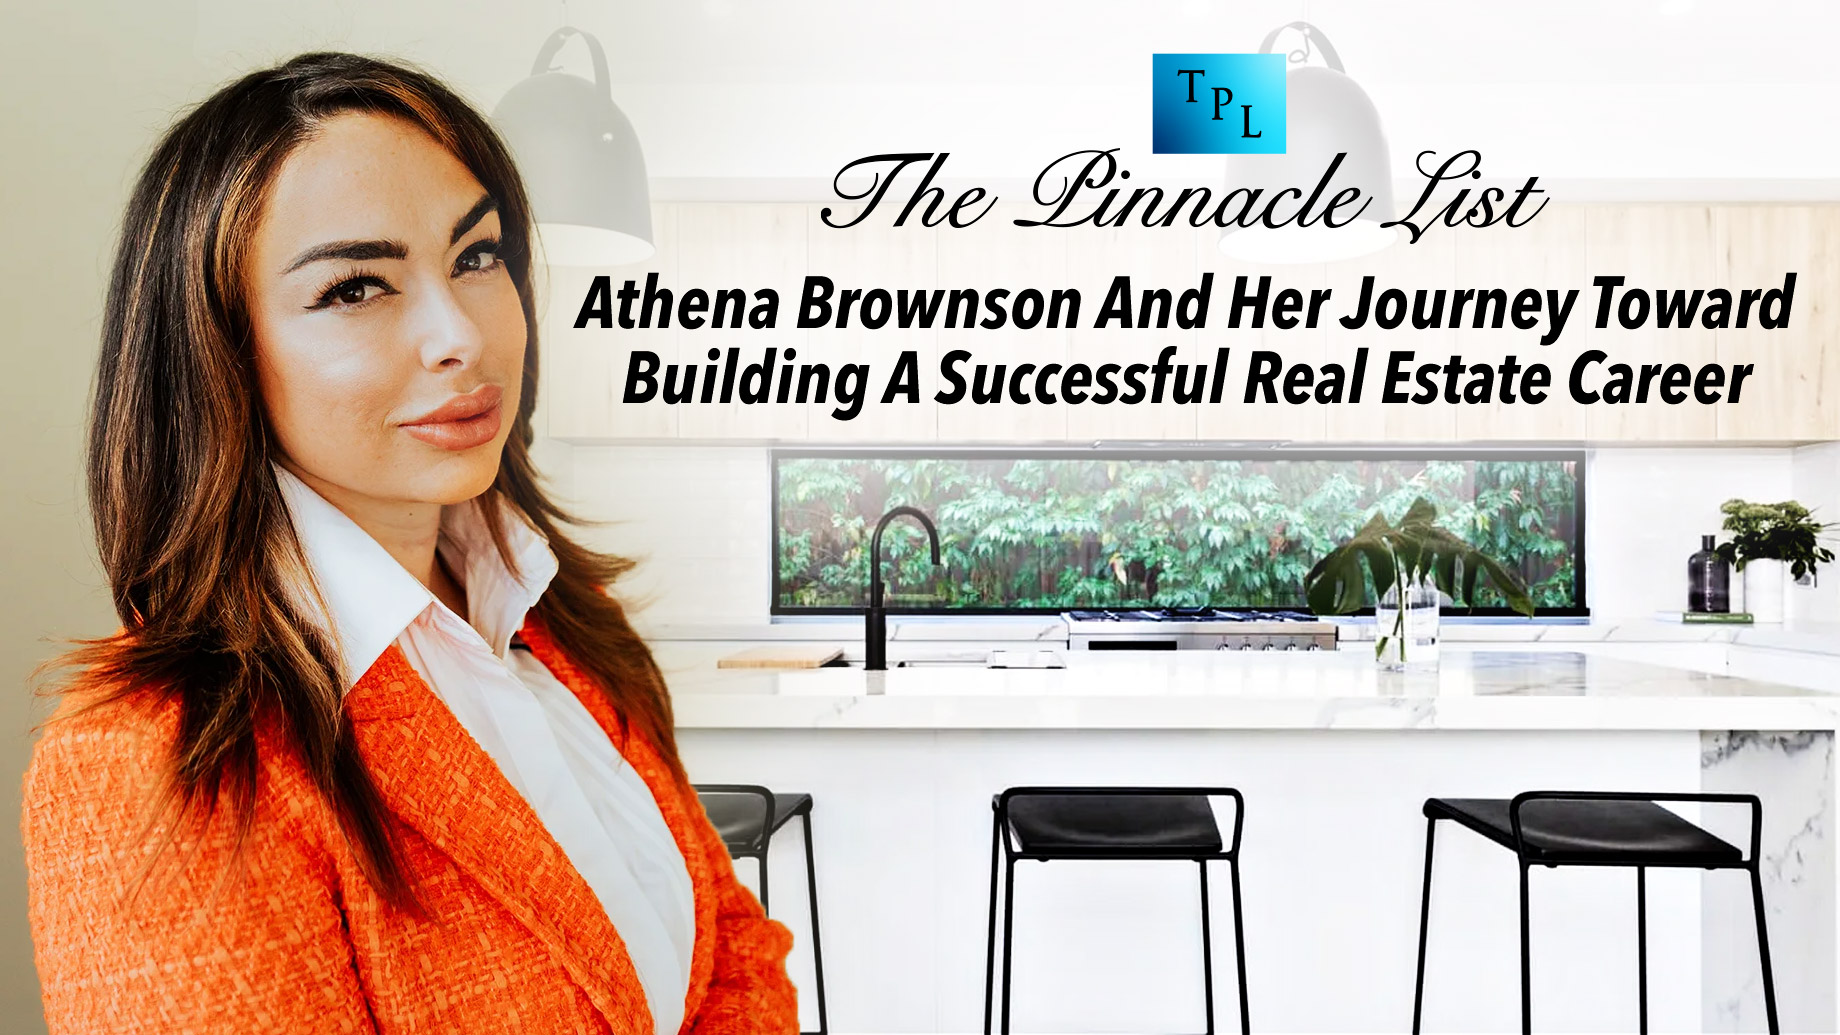 Athena Brownson And Her Journey Toward Building A Successful Real Estate Career Despite Challenges